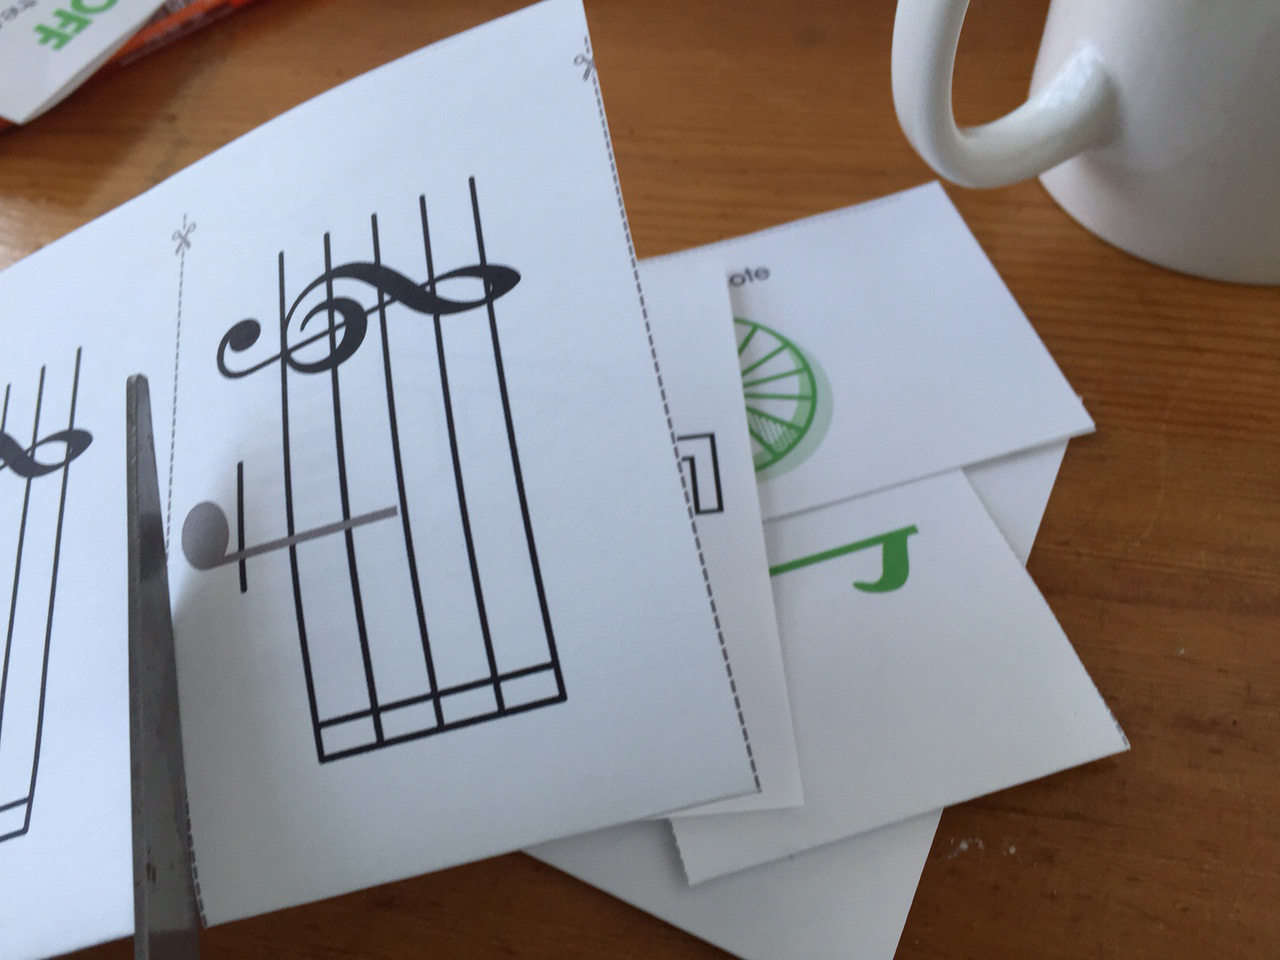 Flashcards to learn how to read music